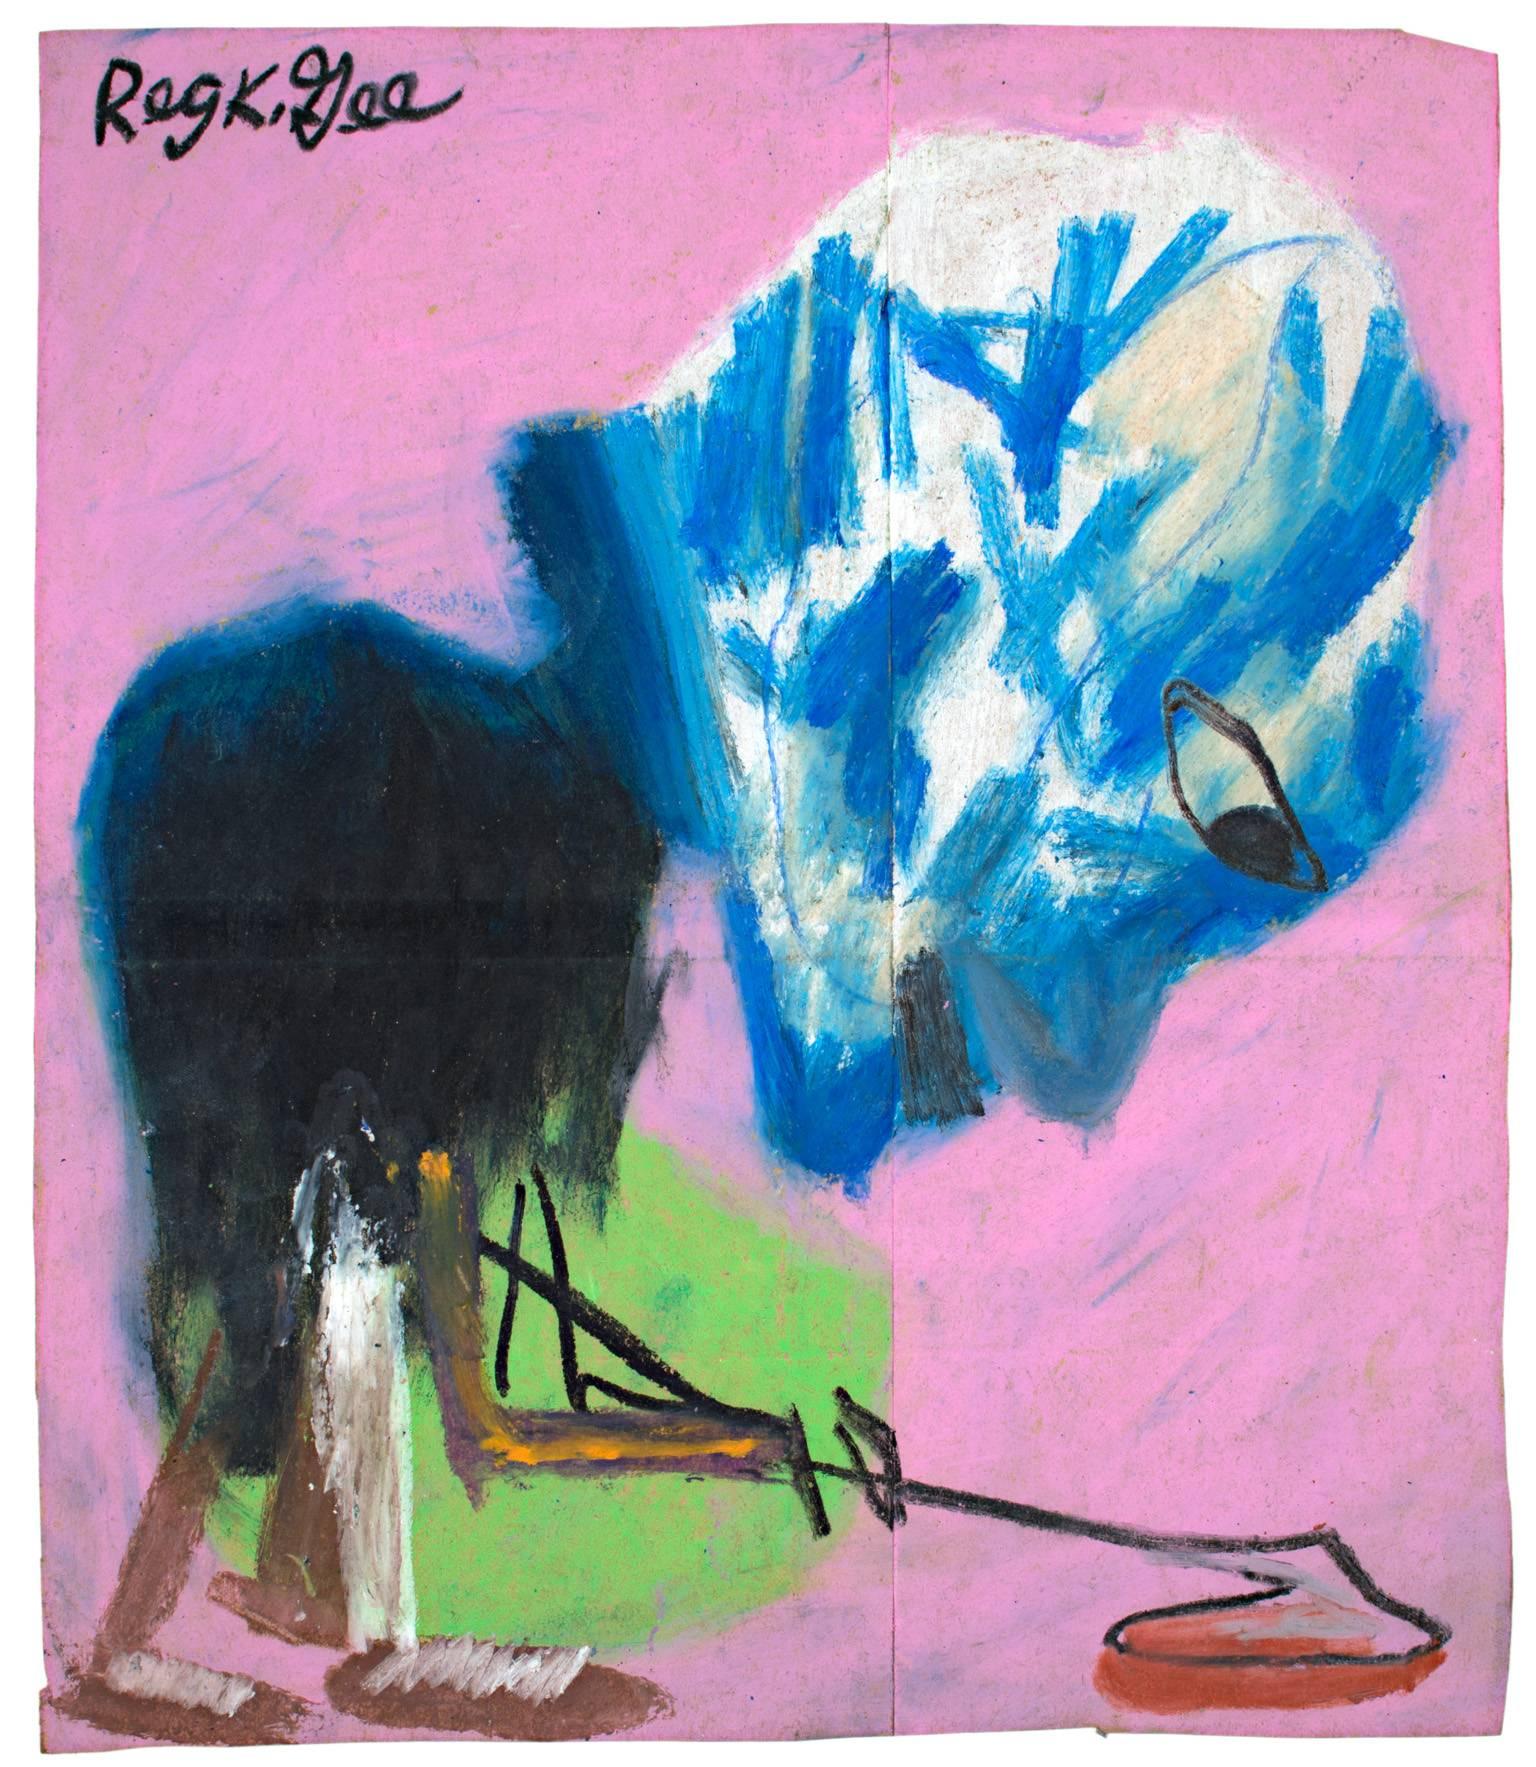 Contemporary neo-expressionist figurative artwork by Reginald K. Gee features a figure with a pastel pink background, bright blue and vibrant green. 

Signed

Art: 14